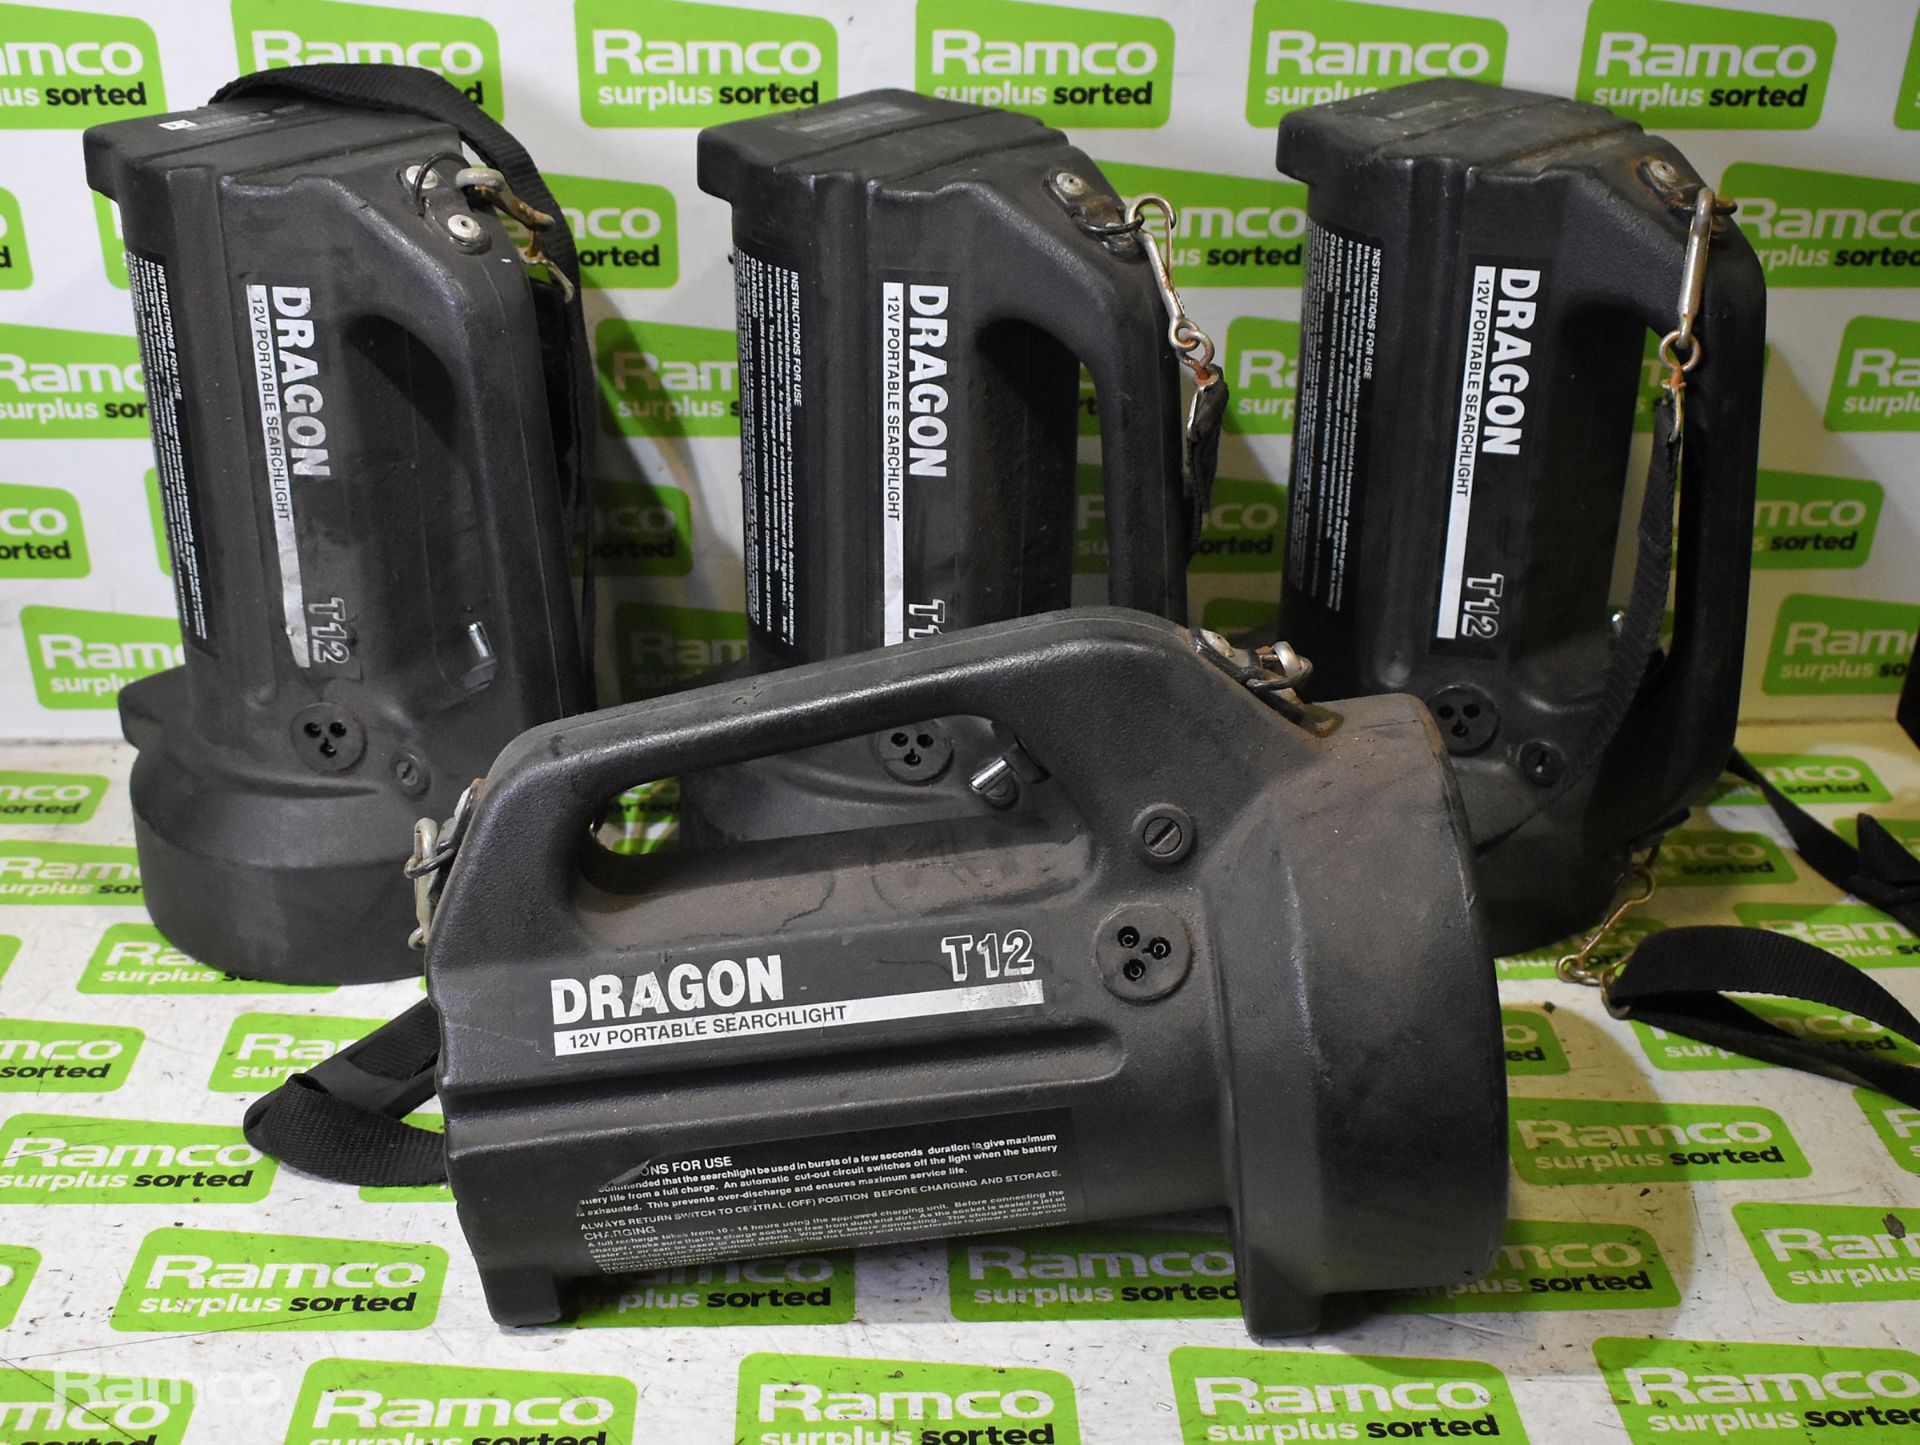 4x Dragon T12 50W portable searchlights, 2x Dragon T12 mains battery chargers - Image 4 of 9